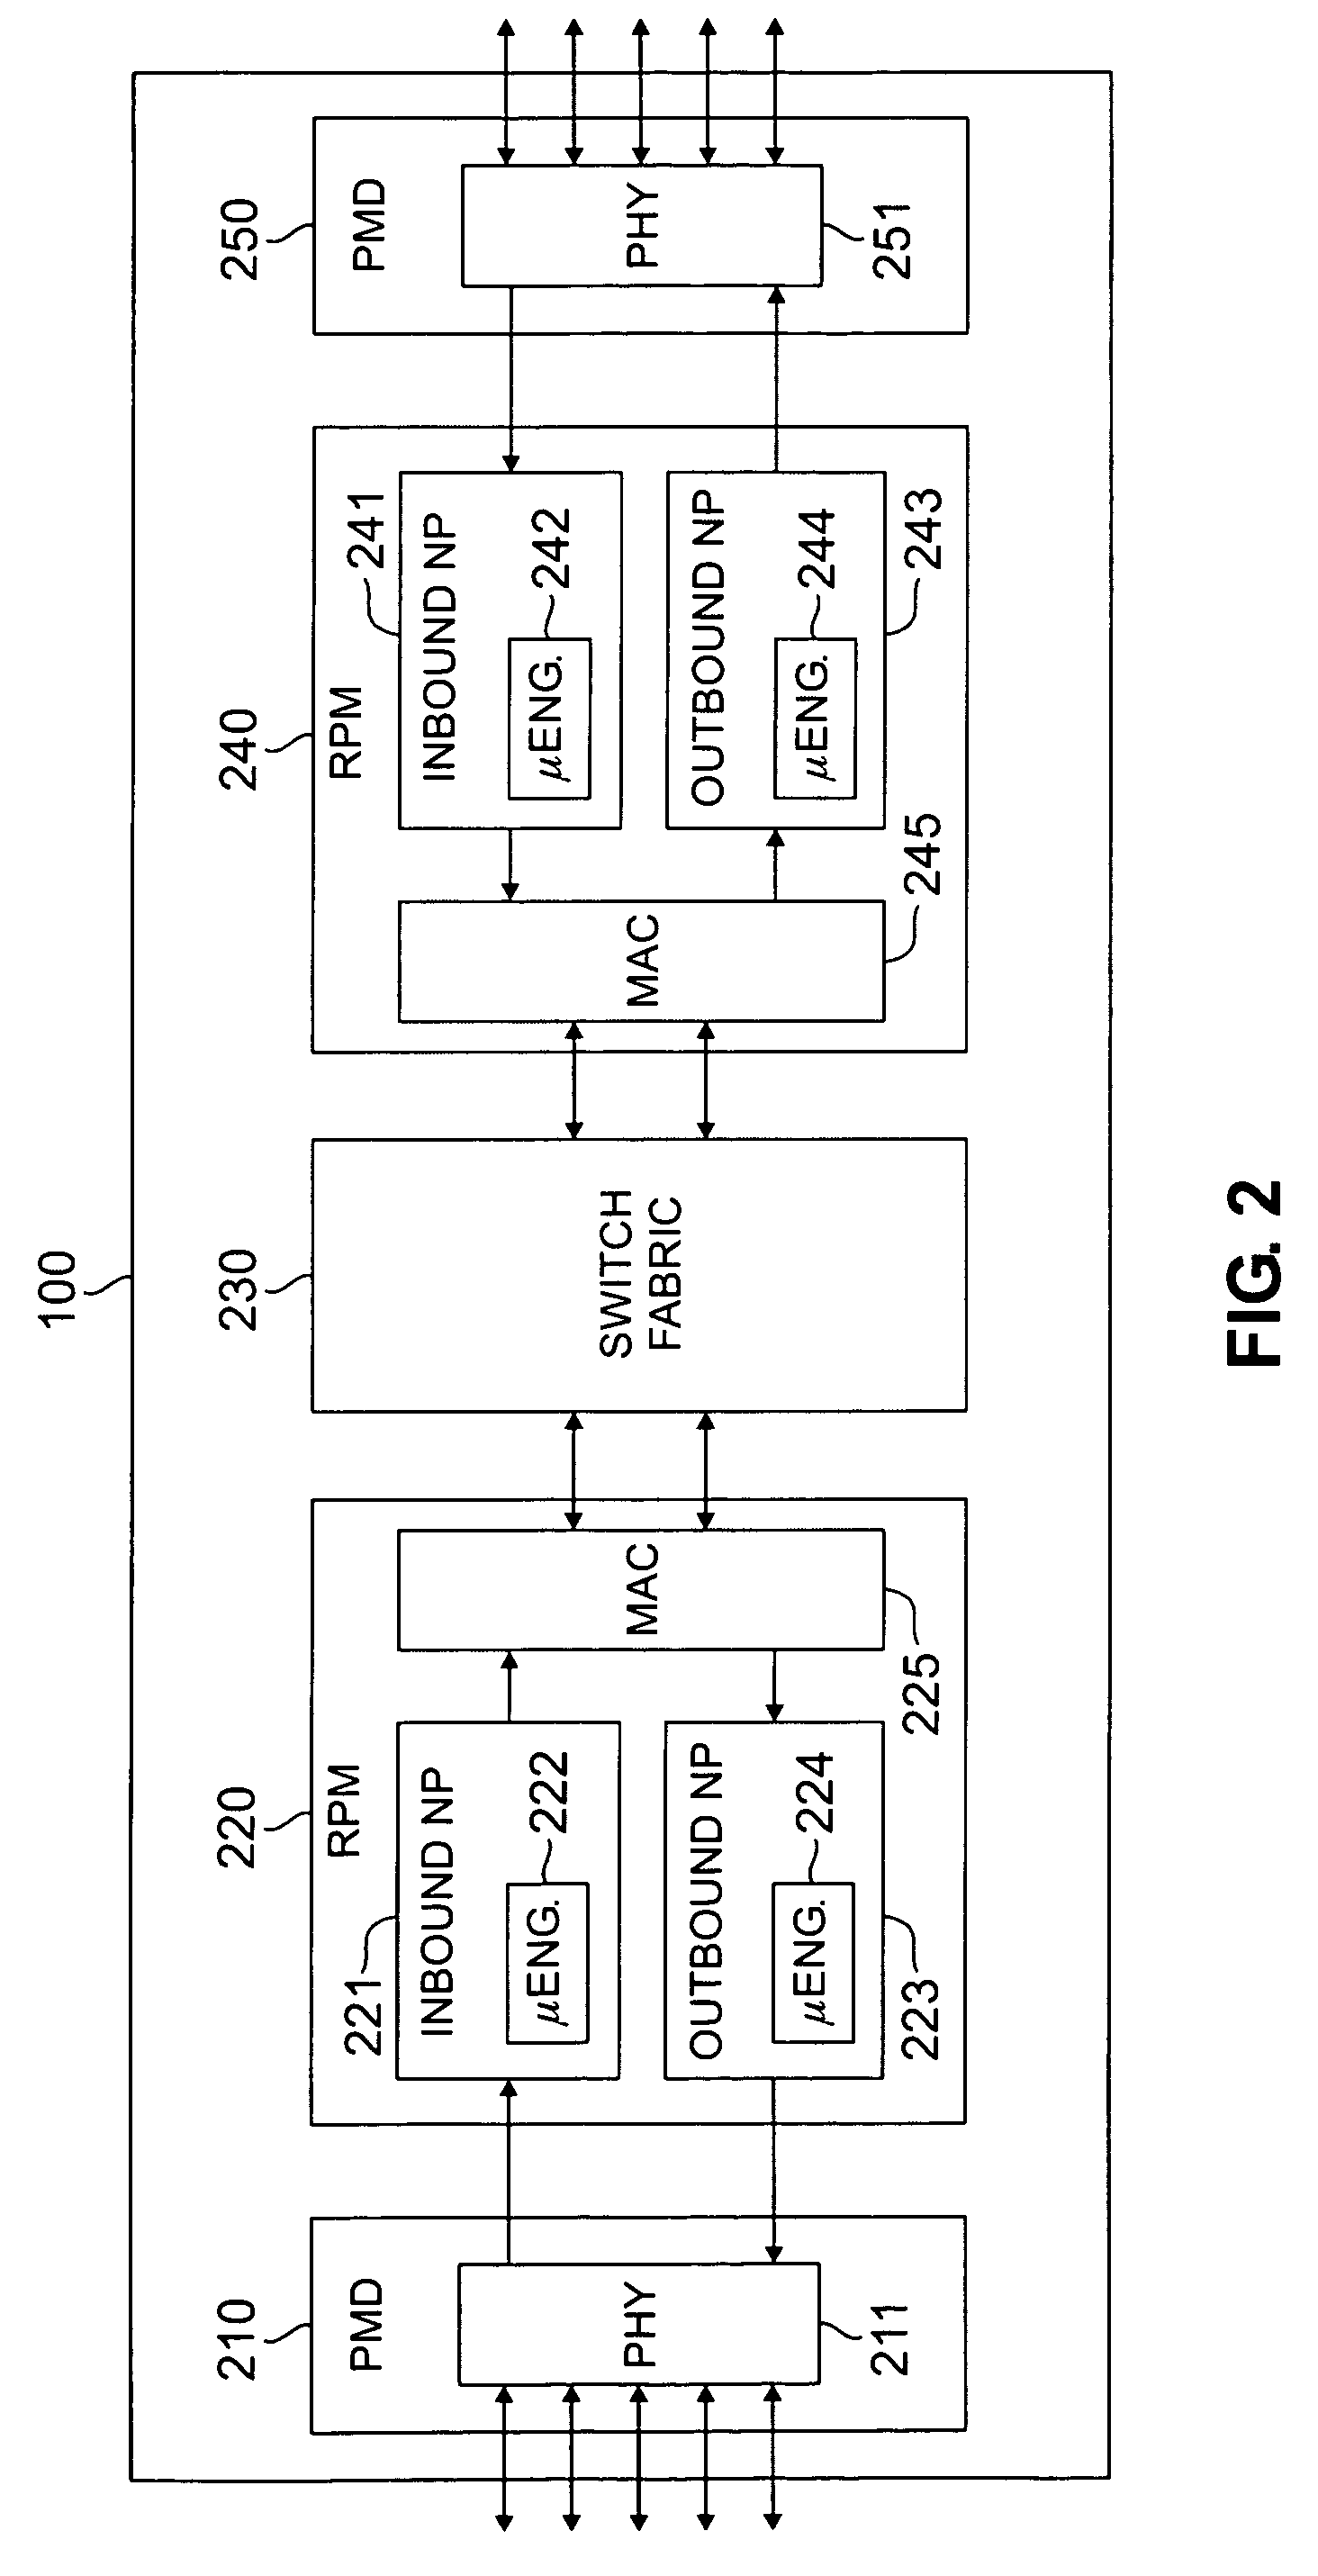 Apparatus and method for searching trie trees using masks with non-symbol boundaries and flooding default routes in a massively parallel router